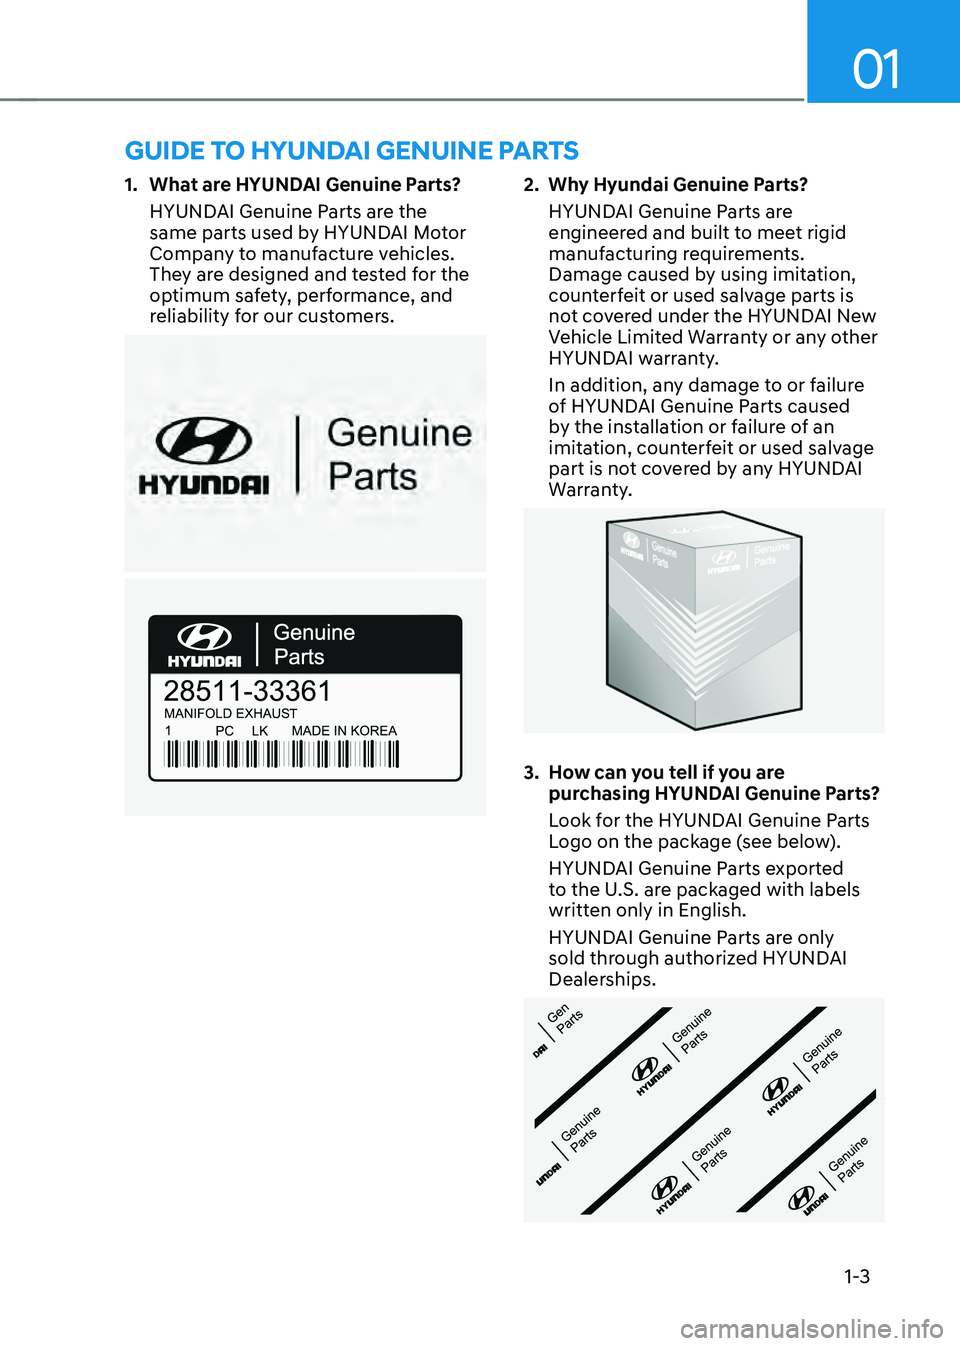 HYUNDAI SONATA HYBRID 2022  Owners Manual 01
1-3
1. What are HYUNDAI Genuine Parts?
HYUNDAI Genuine Parts are the 
same parts used by HYUNDAI Motor 
Company to manufacture vehicles. 
They are designed and tested for the 
optimum safety, perfo